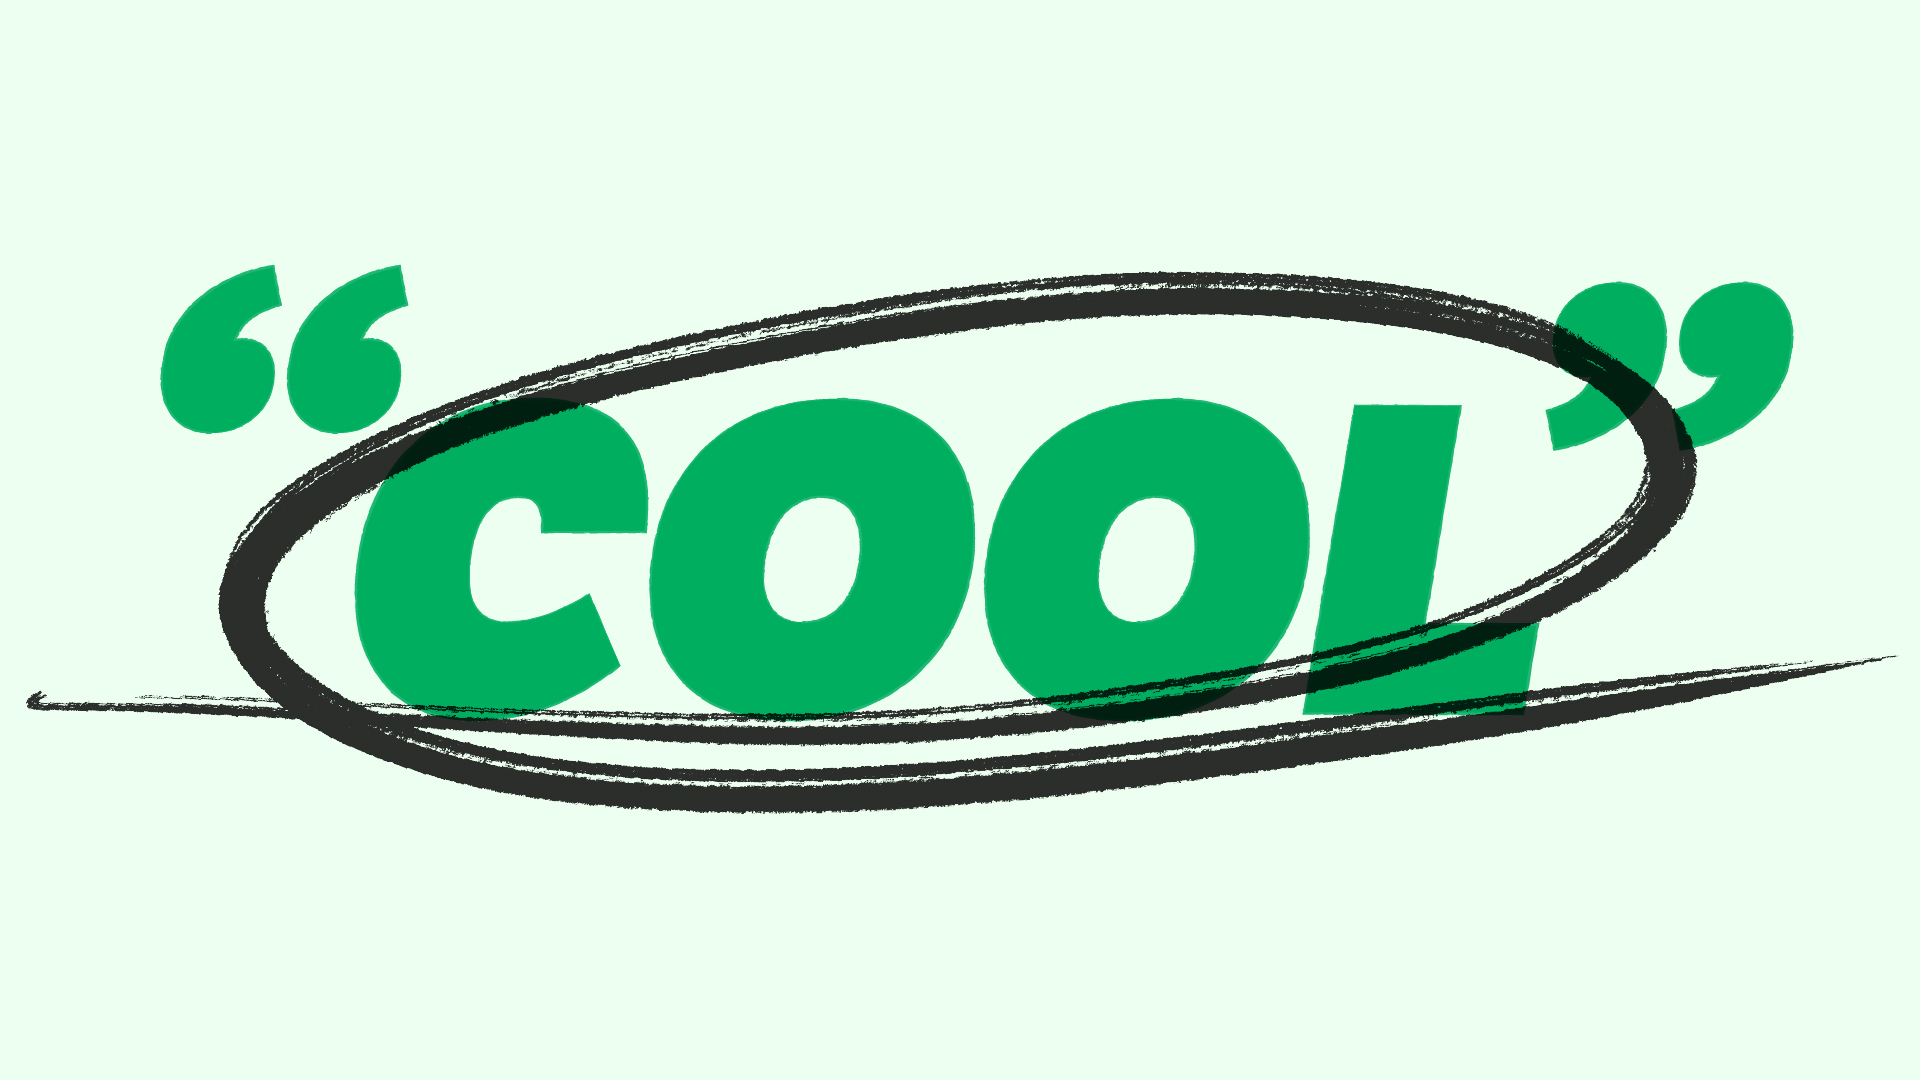 You'll Be Truly "Zooly" With This Complete List Of Slang For "Cool"